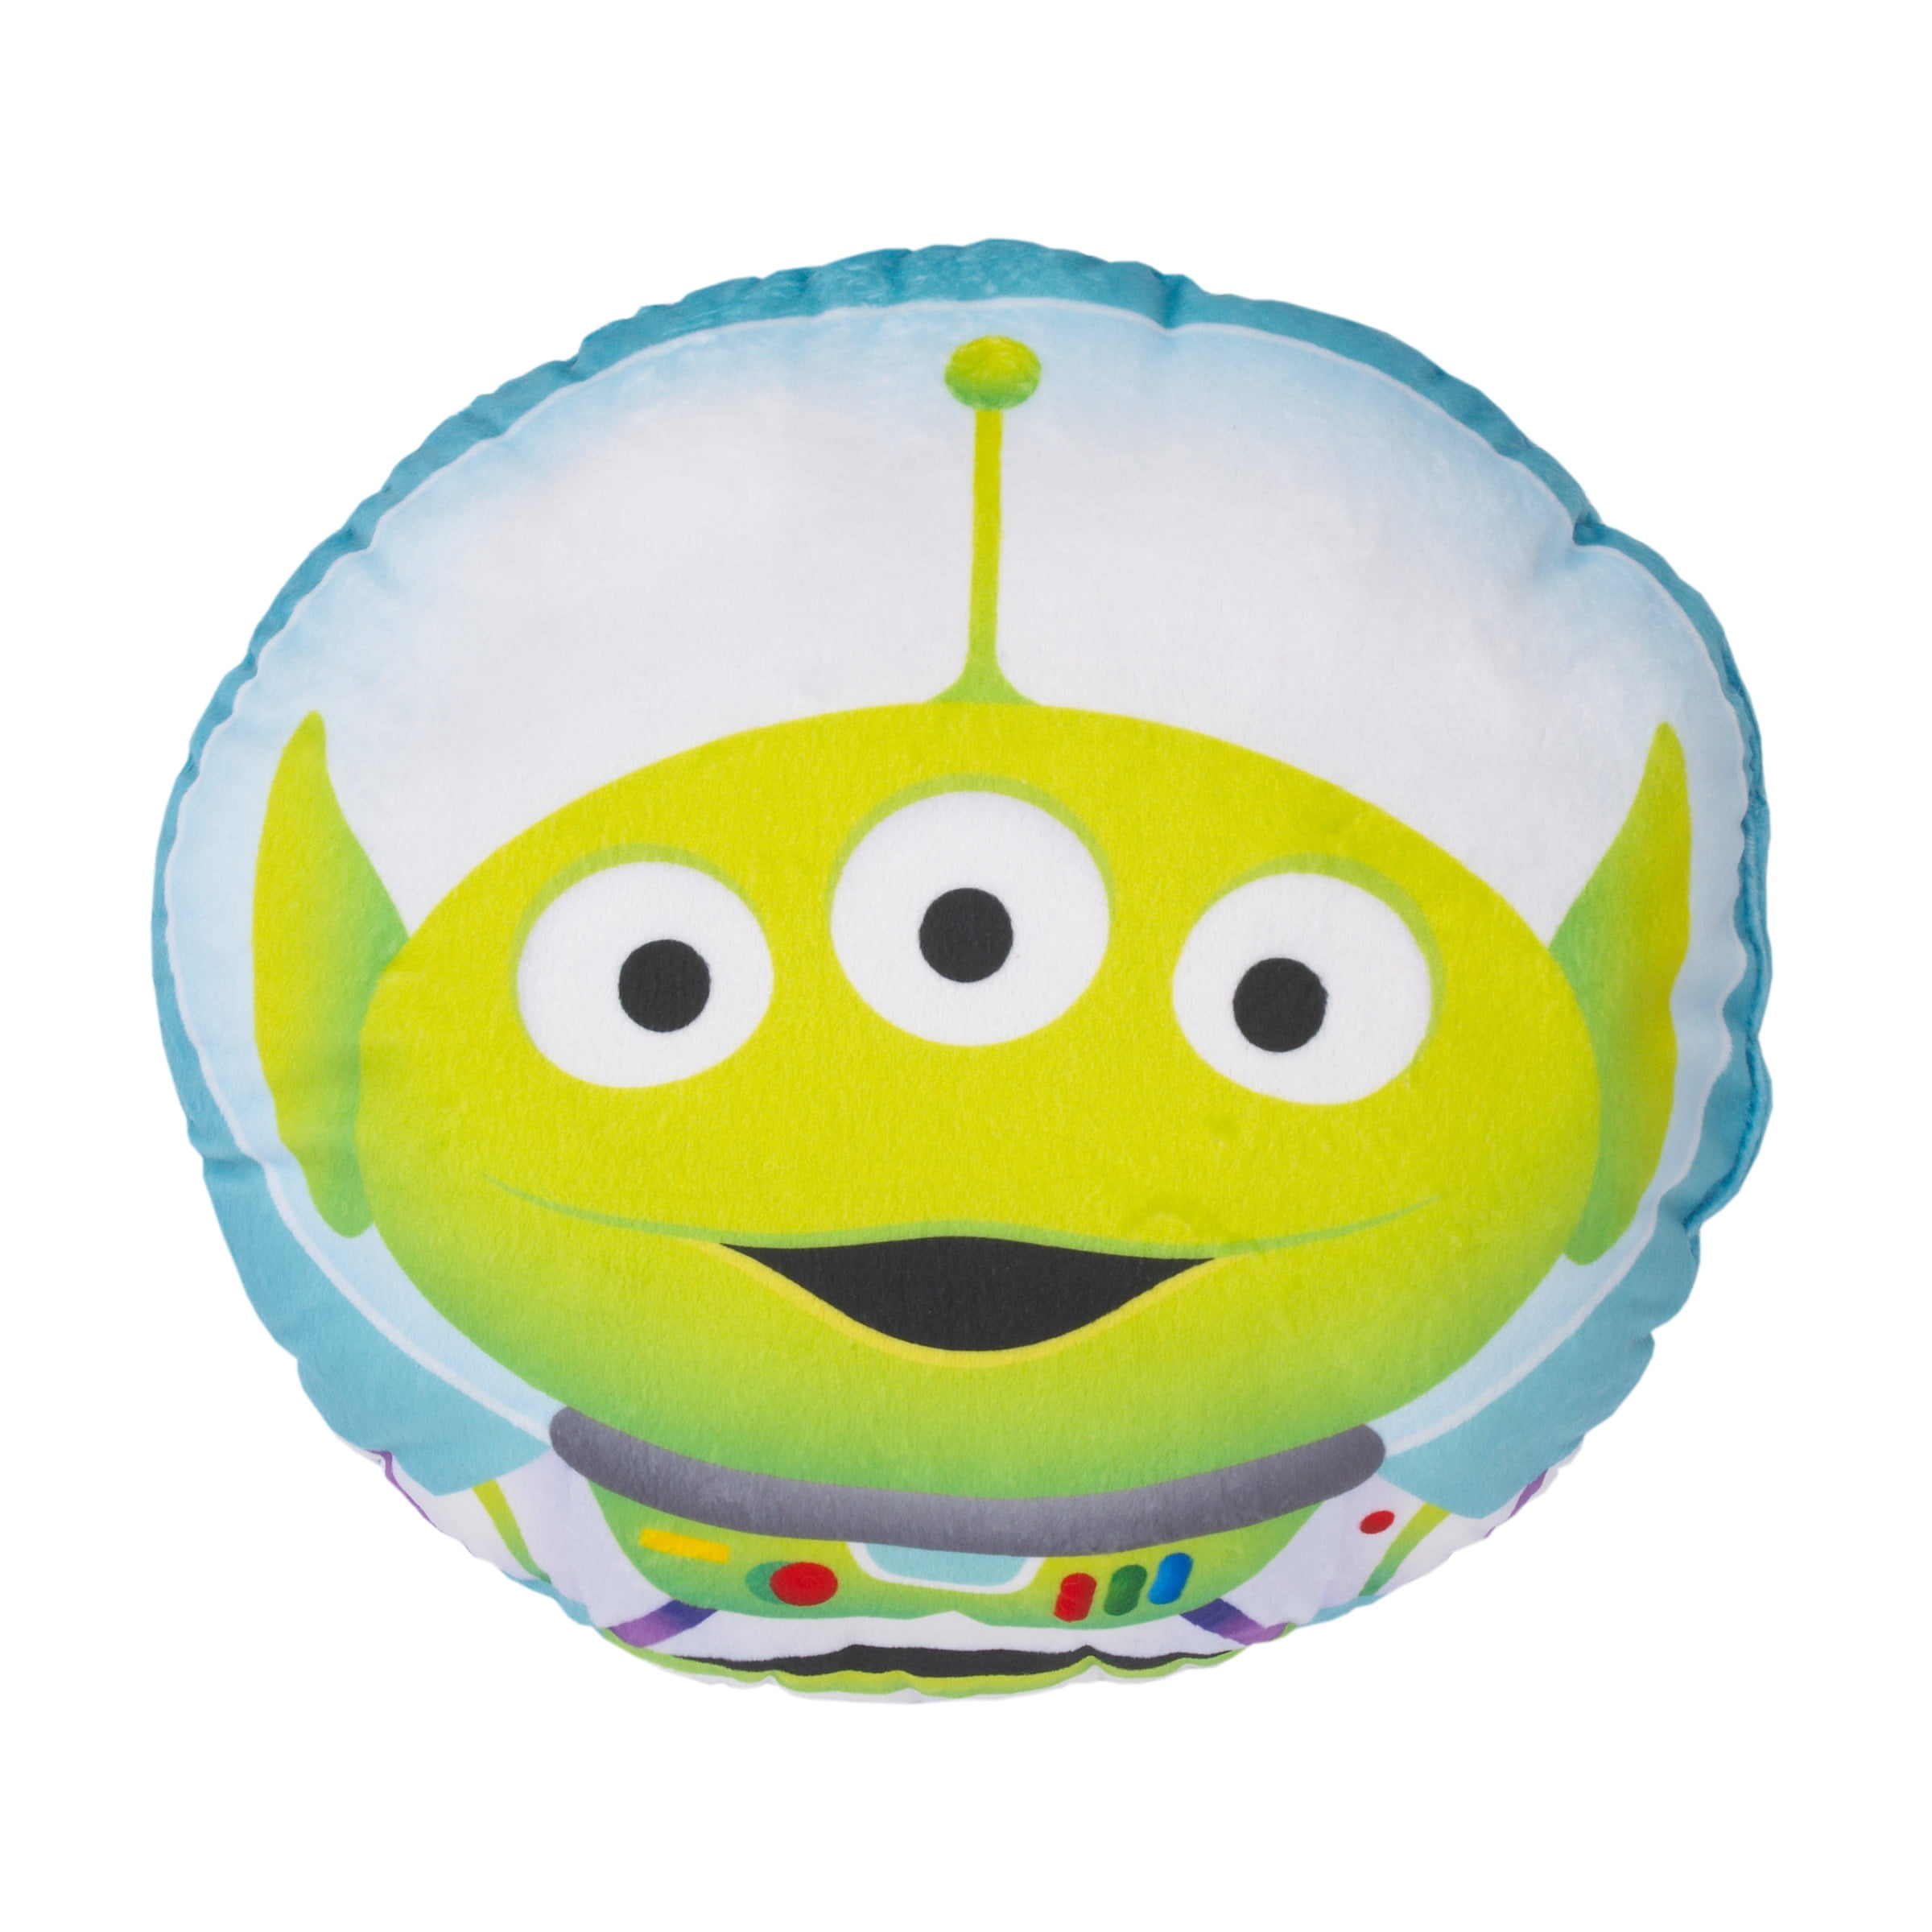 ❤️ SALE Official TOY STORY 4 Space Aliens Cushion Pillow Travel Home Primark 